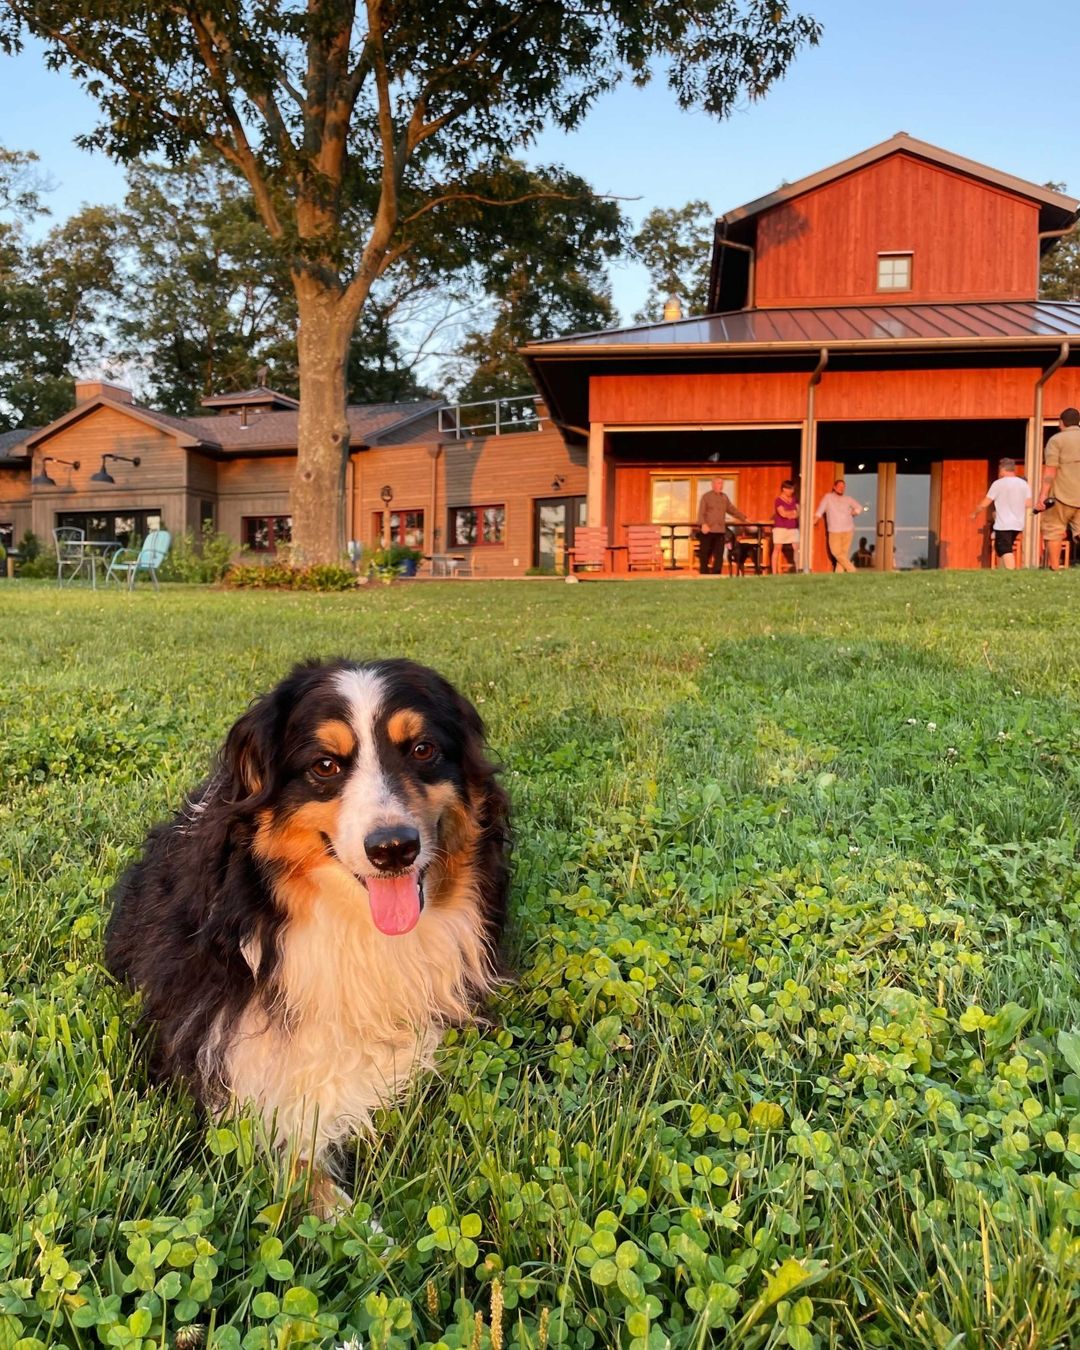 #HVAgventures destination @re_farm_cafe is REdefining the meaning of local foods while embracing regenerative thinking and organic practices.
RE Farm Cafe offers an innovative opportunity to learn, participate, and experience true, realistic sustainable 